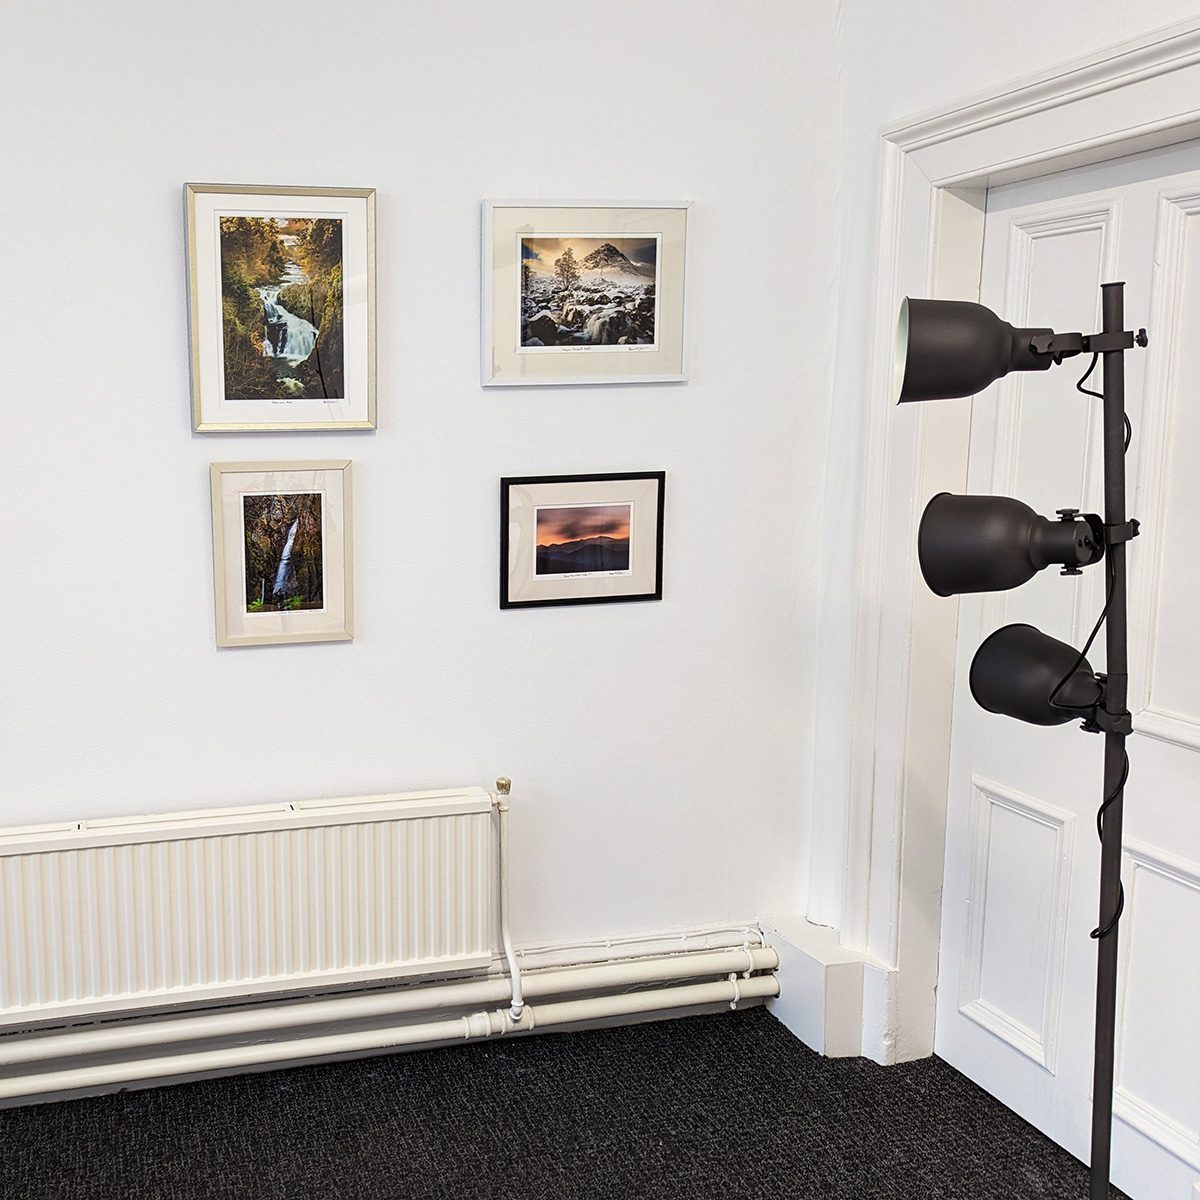 Image of interior of Diarmid Weir Photography gallery